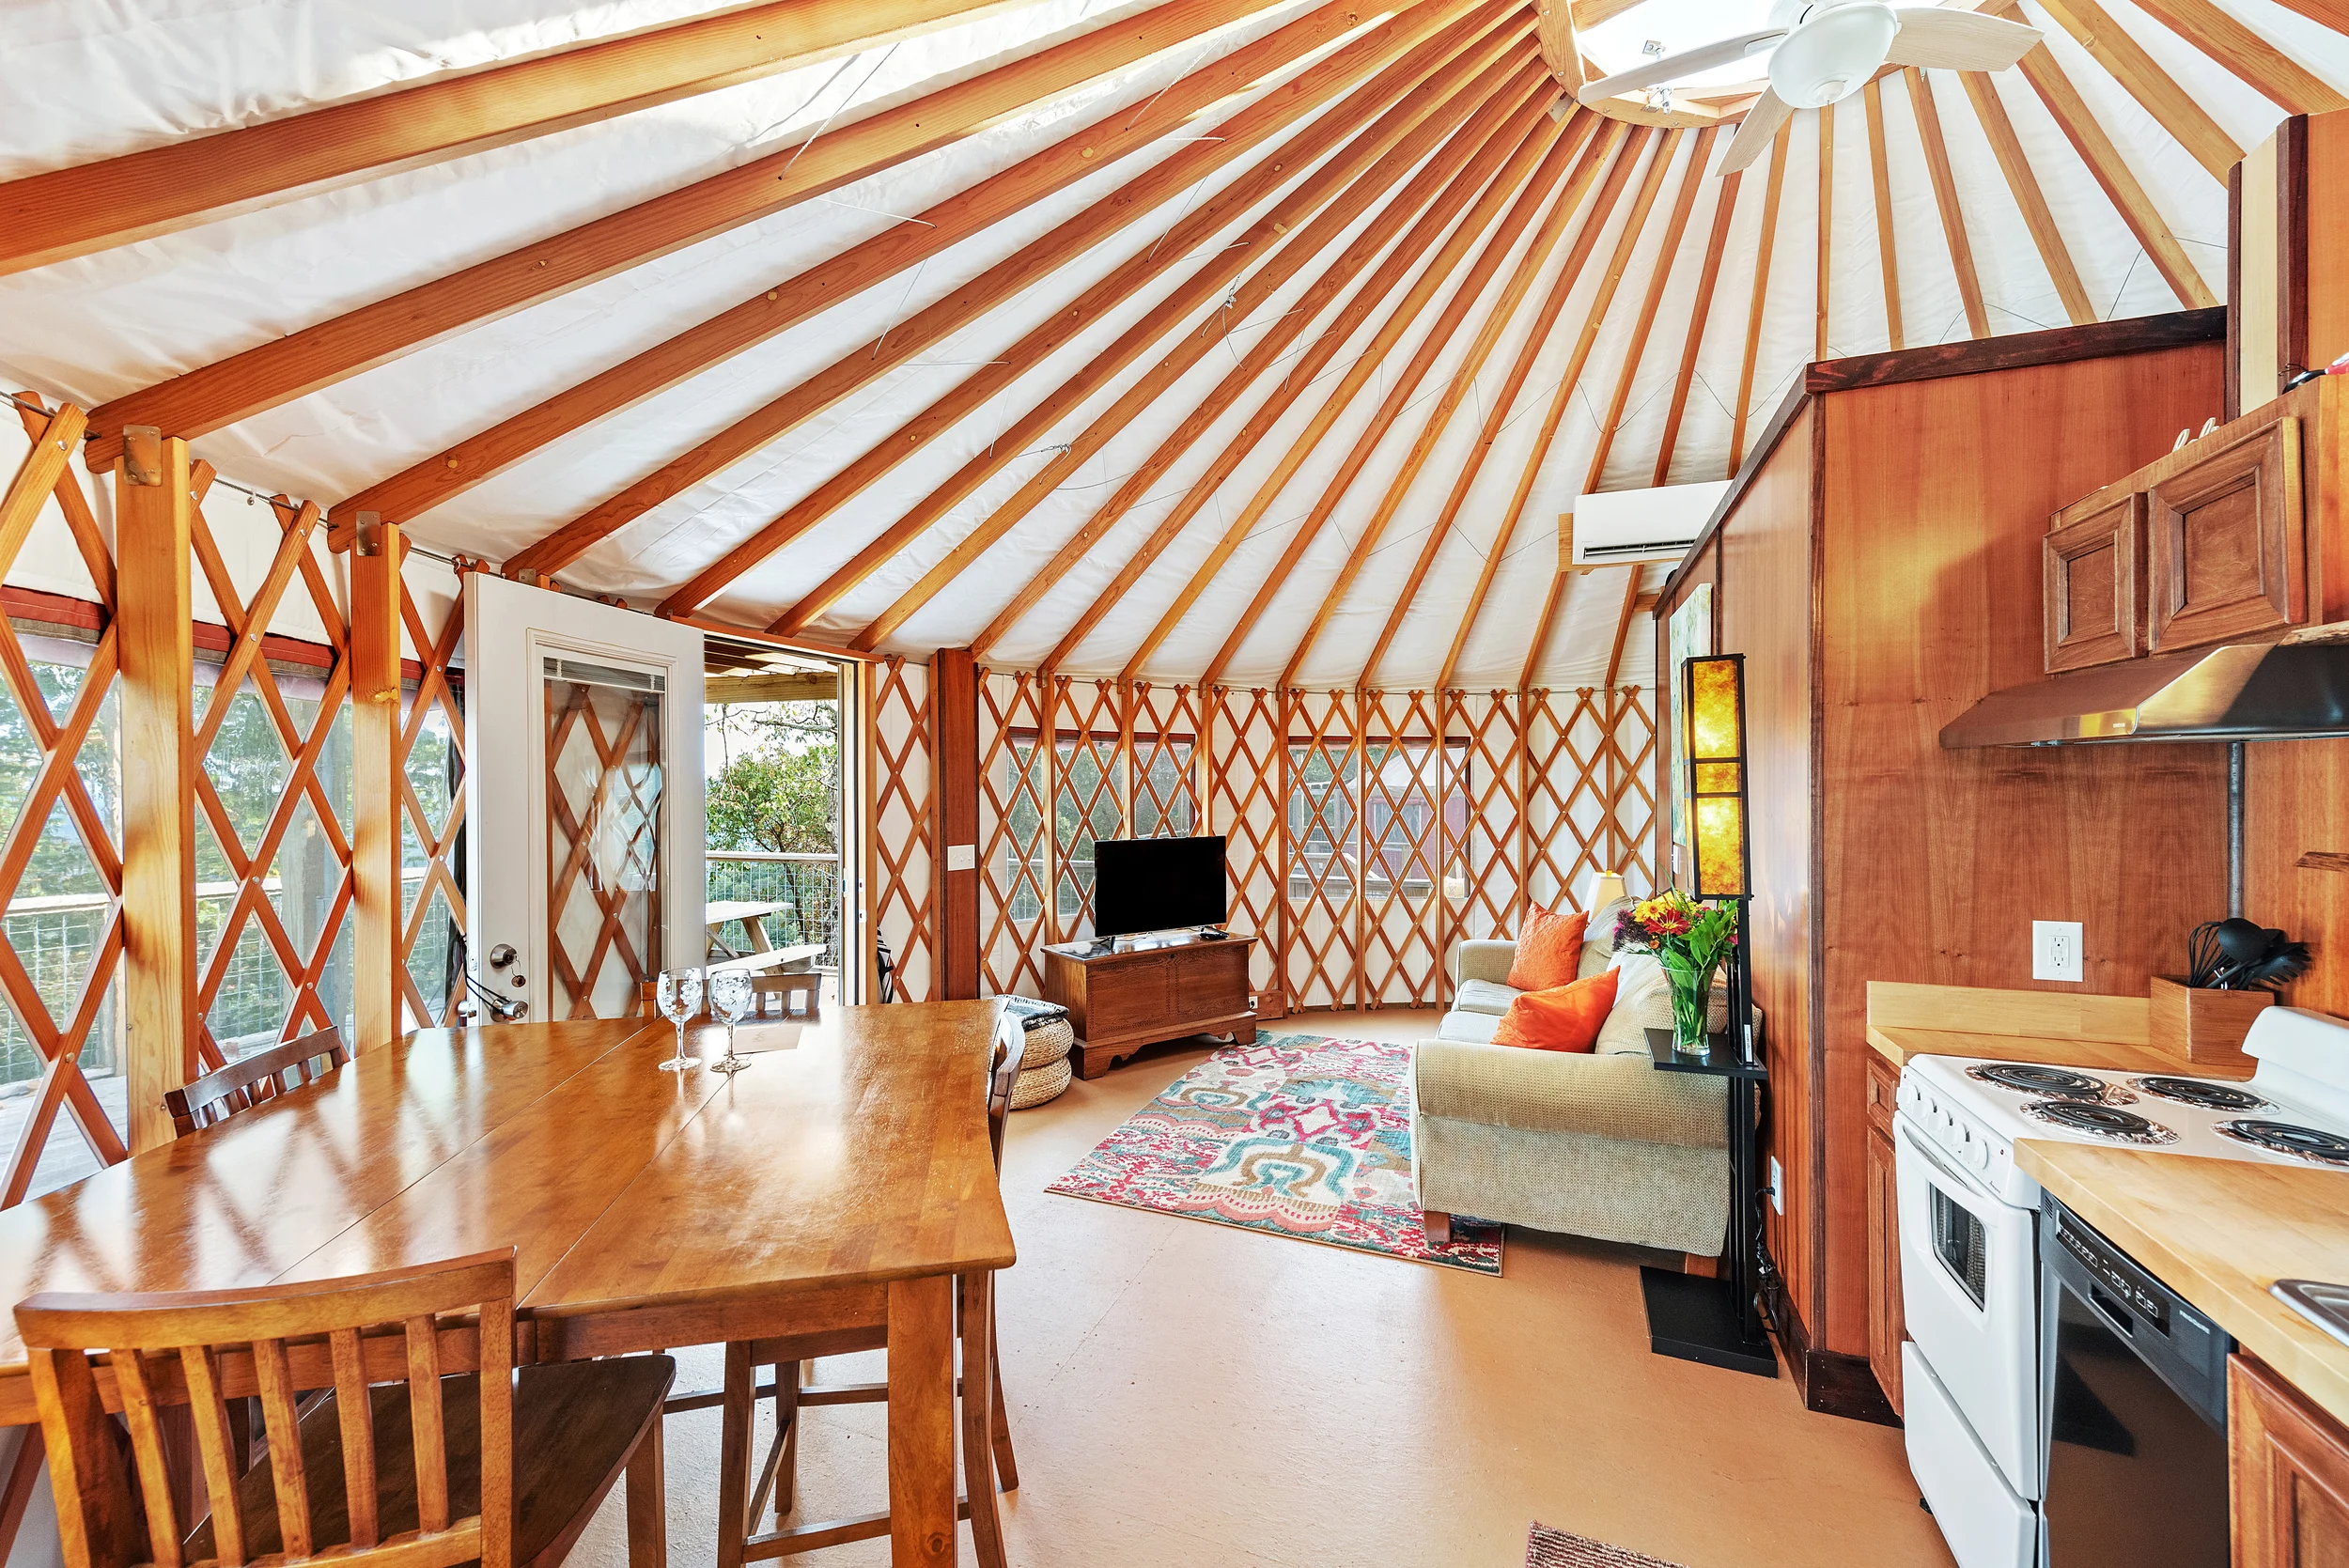 Cherry yurt view from kitchen into family room